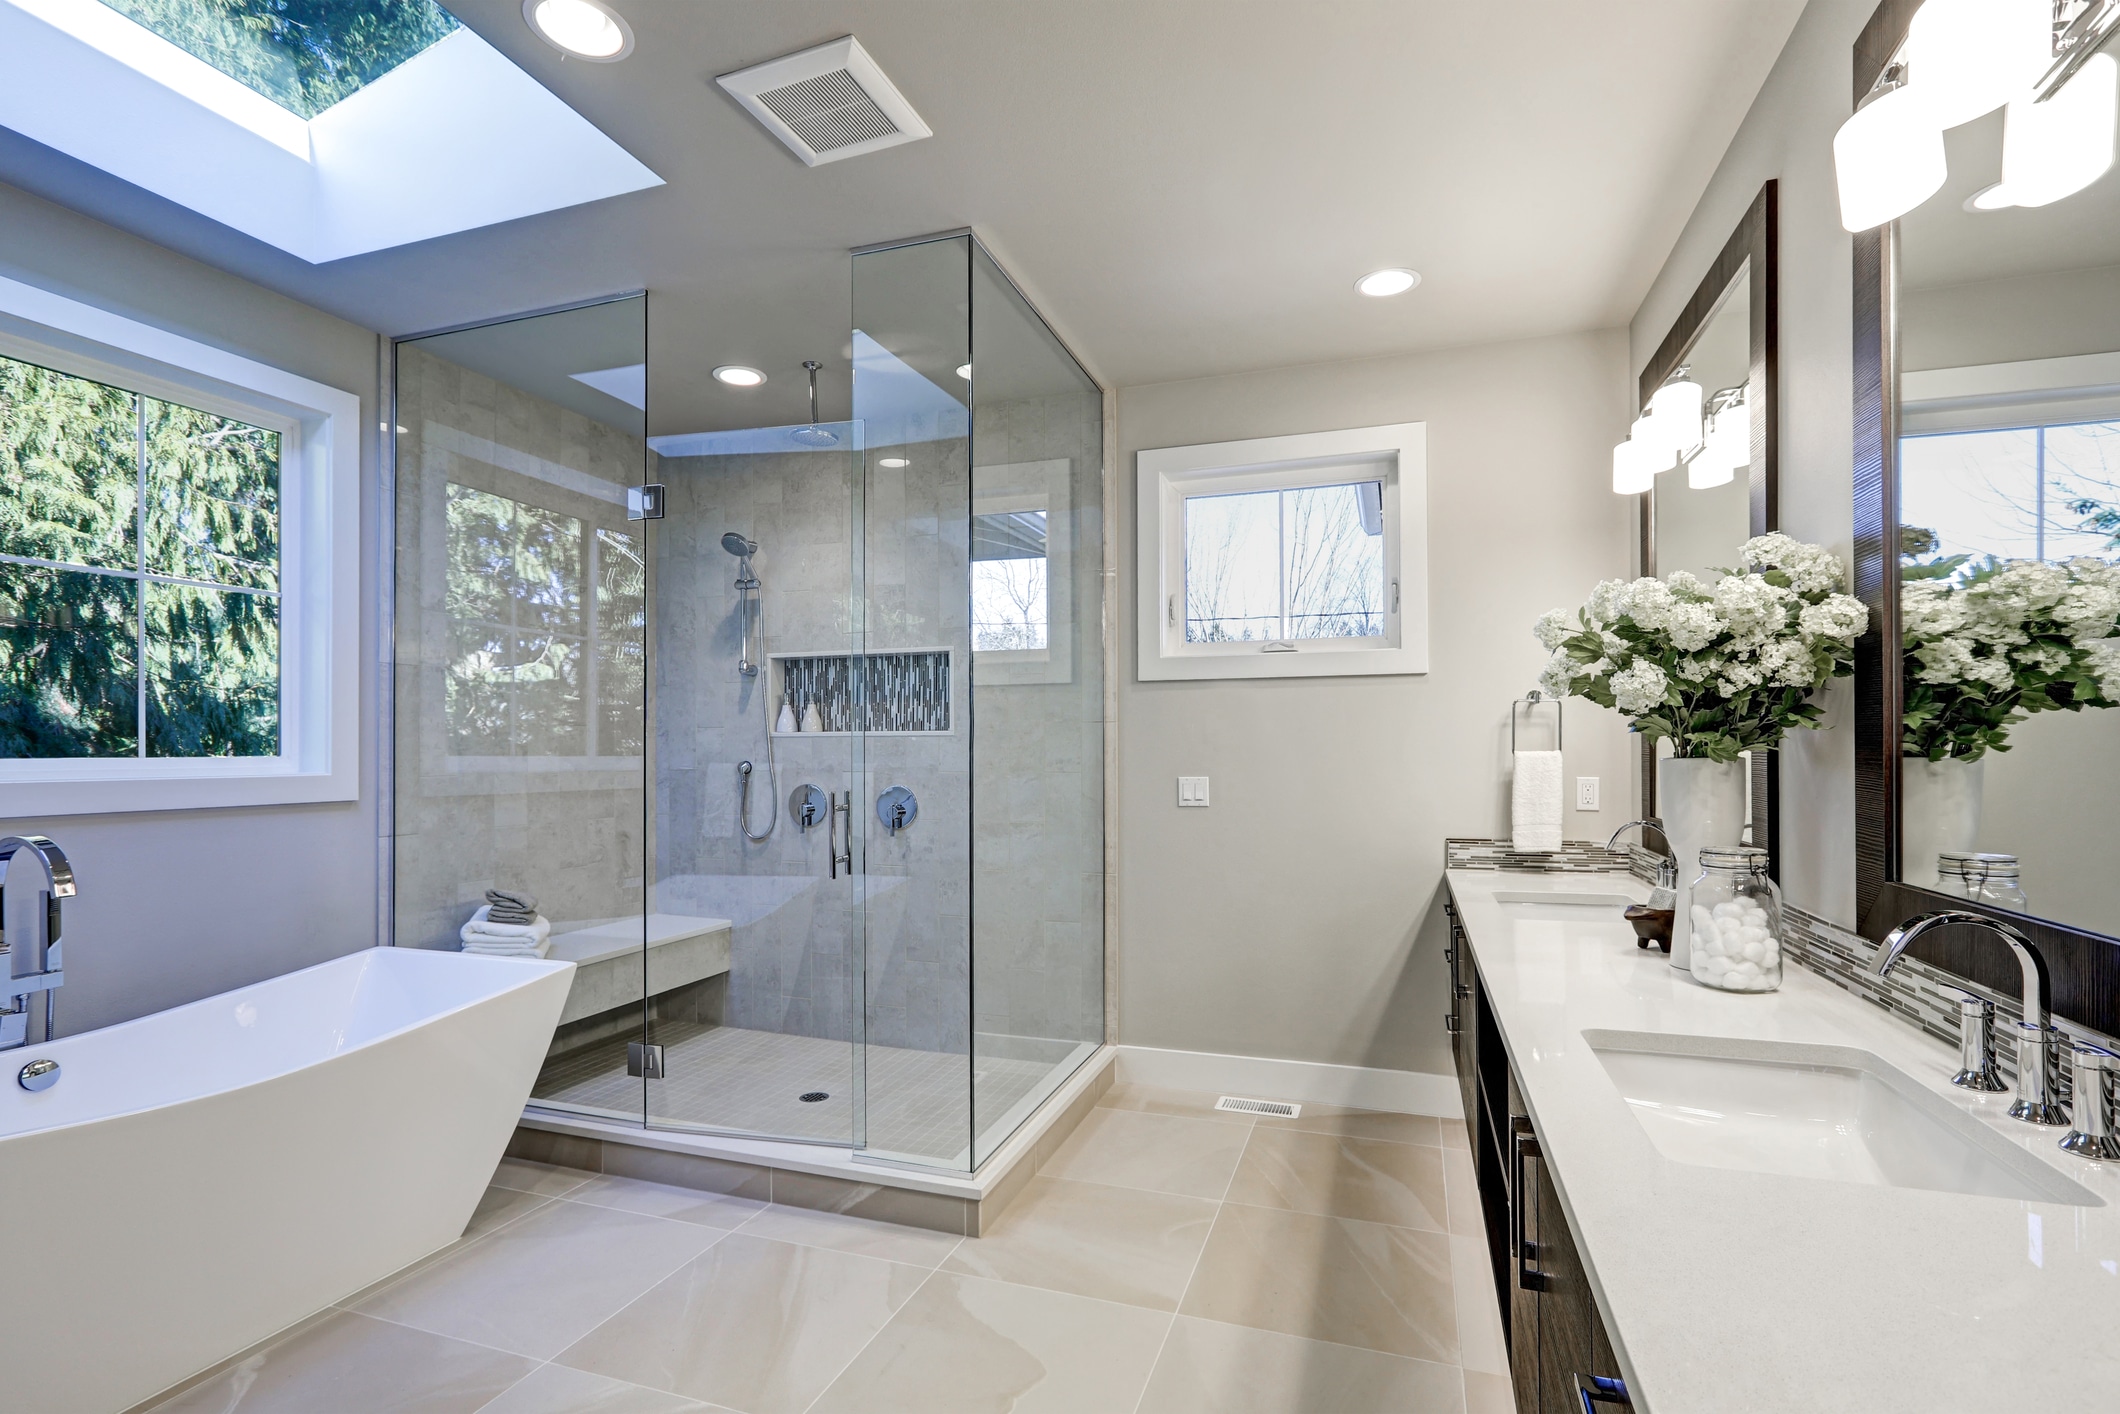 A bathroom renovation is a great way to add value and appeal to your home.